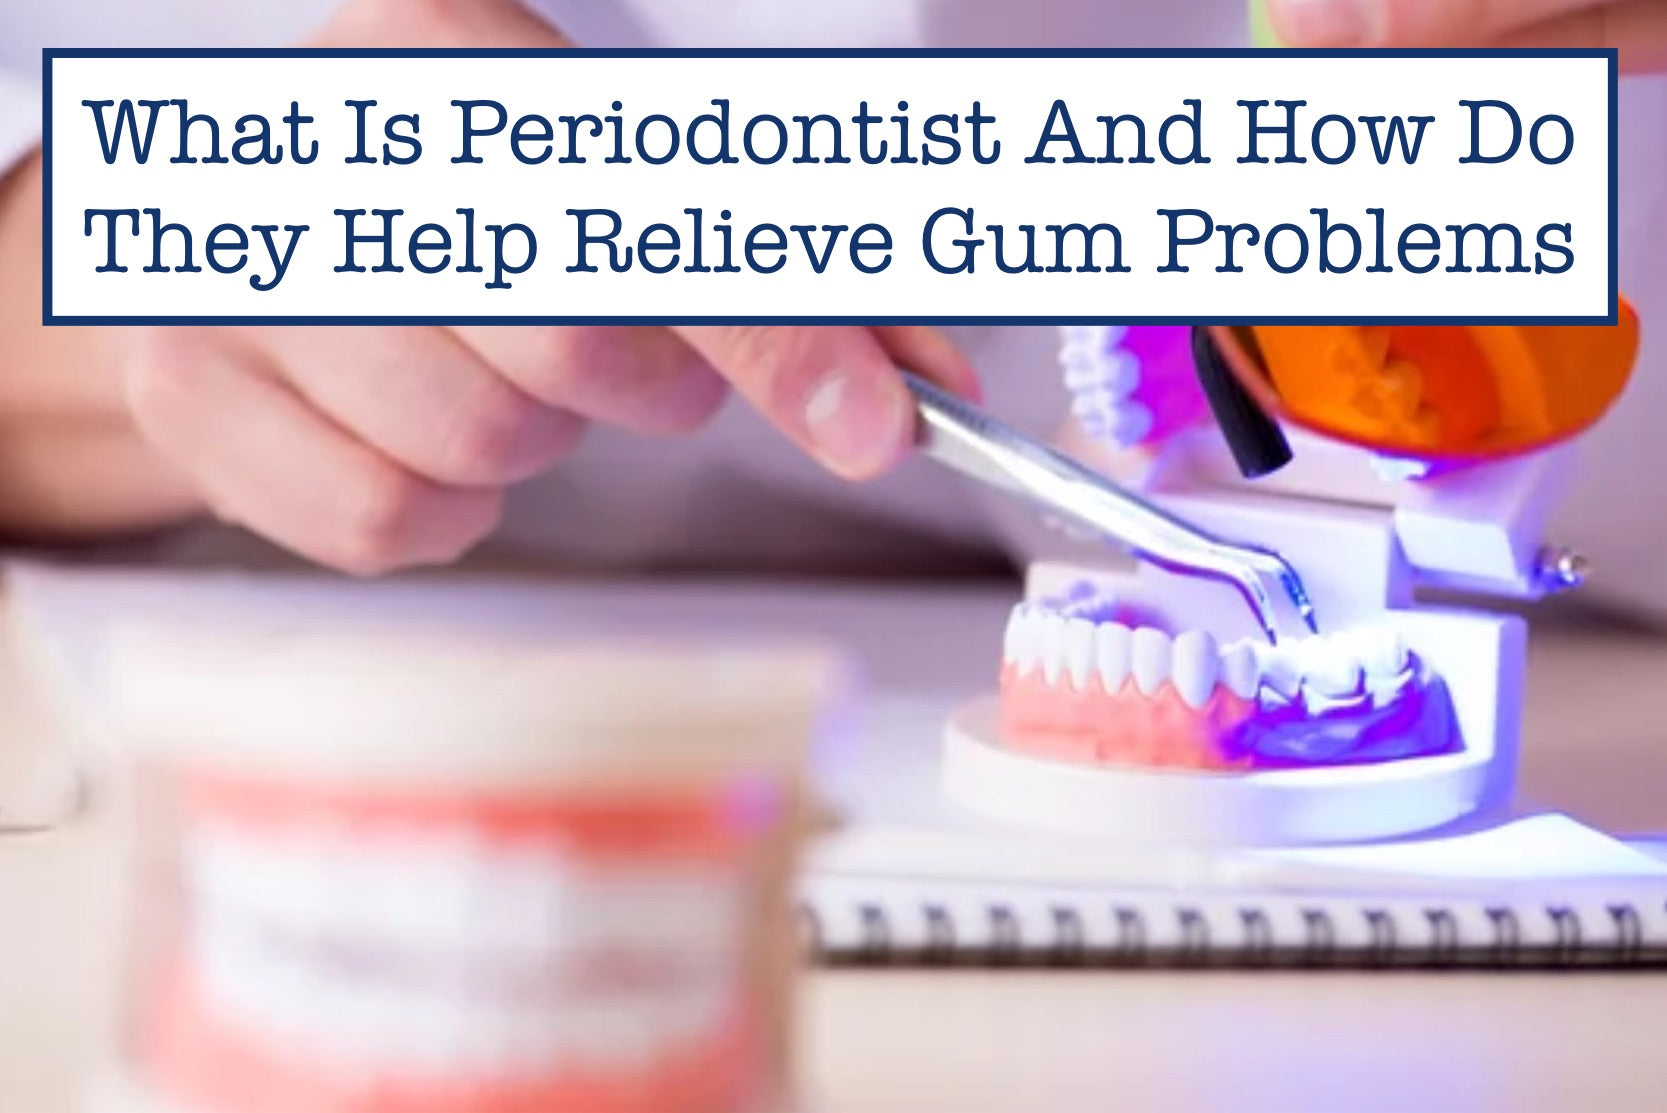 What Is Periodontist And How Do They Help Relieve Gum Problems